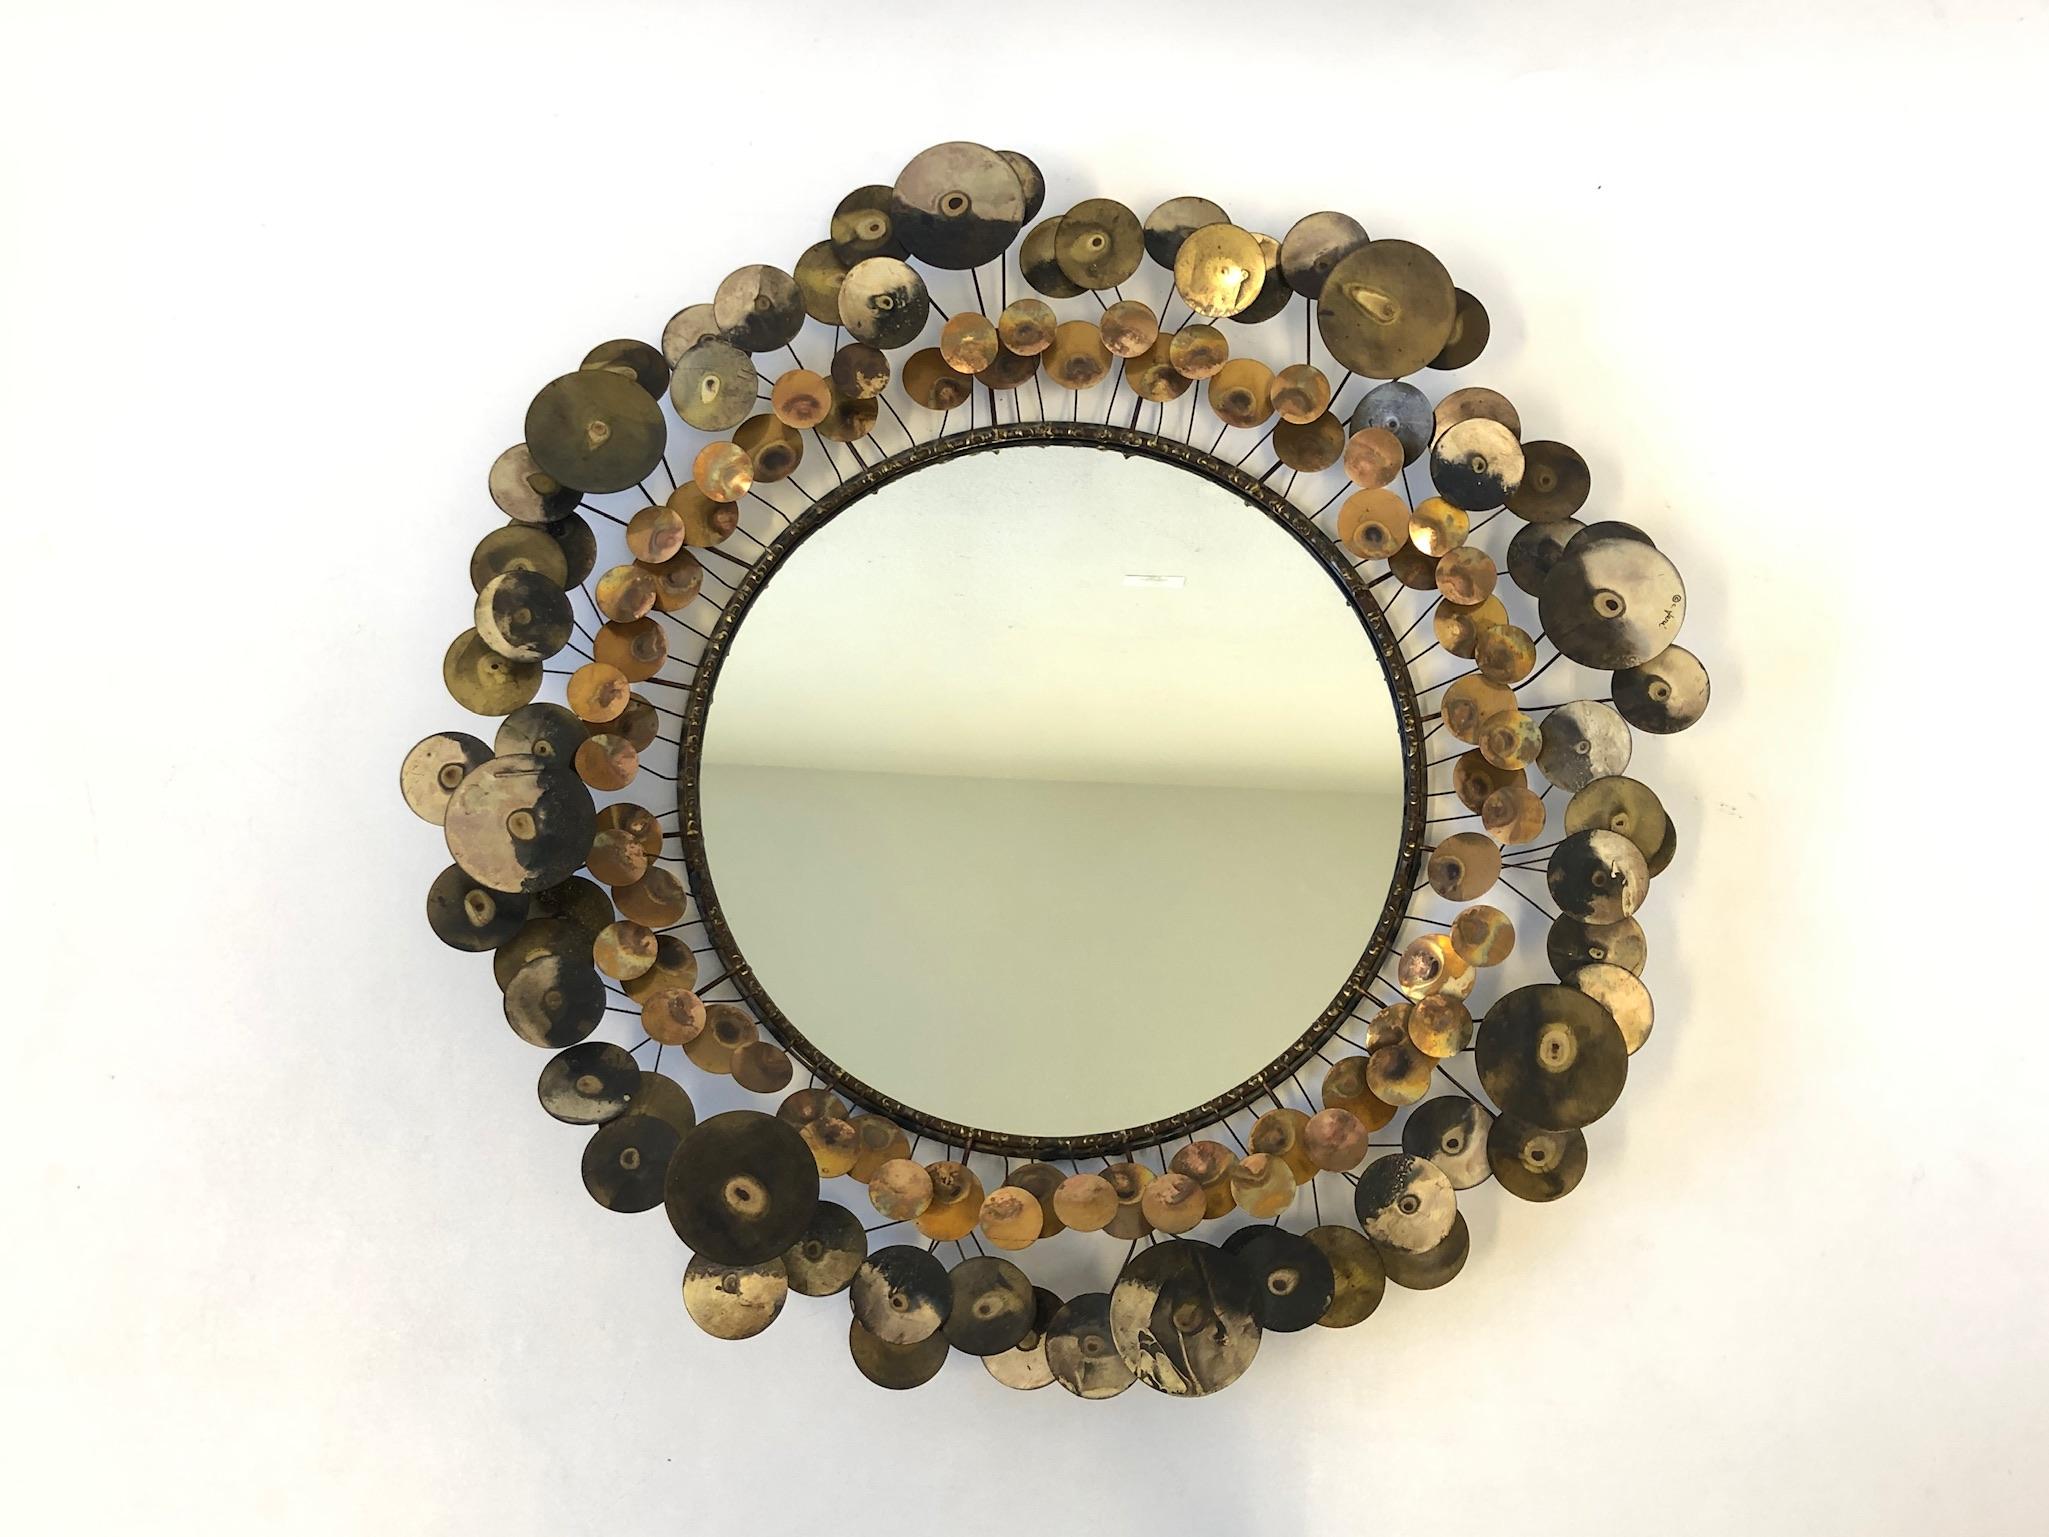 Brass and Copper “Raindrops” Mirror by Curtis Jeré 2